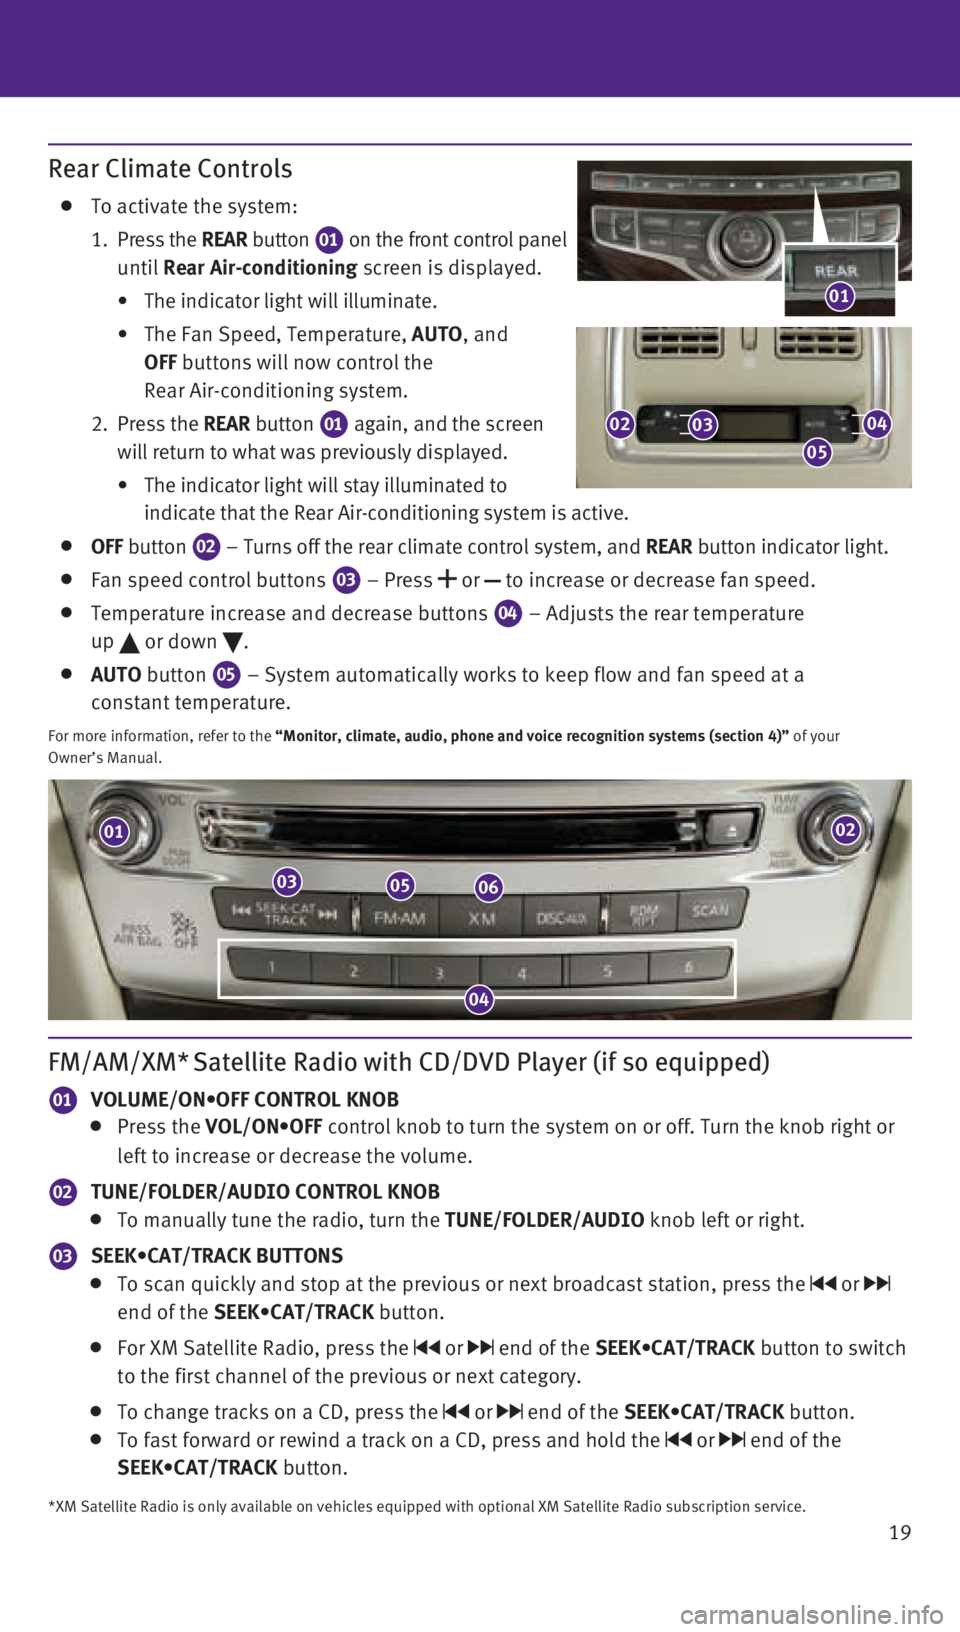 INFINITI QX60 HYBRID 2014  Quick Reference Guide 19
0201
030506
04
FM/AM/XM* Satellite Radio with CD/DVD Player (if so equipped)
01 VOLUME/ON•OFF CONTROL KNOB  
     Press  the  VOL/ON•OFF control knob to turn the system on or off. Turn the knob